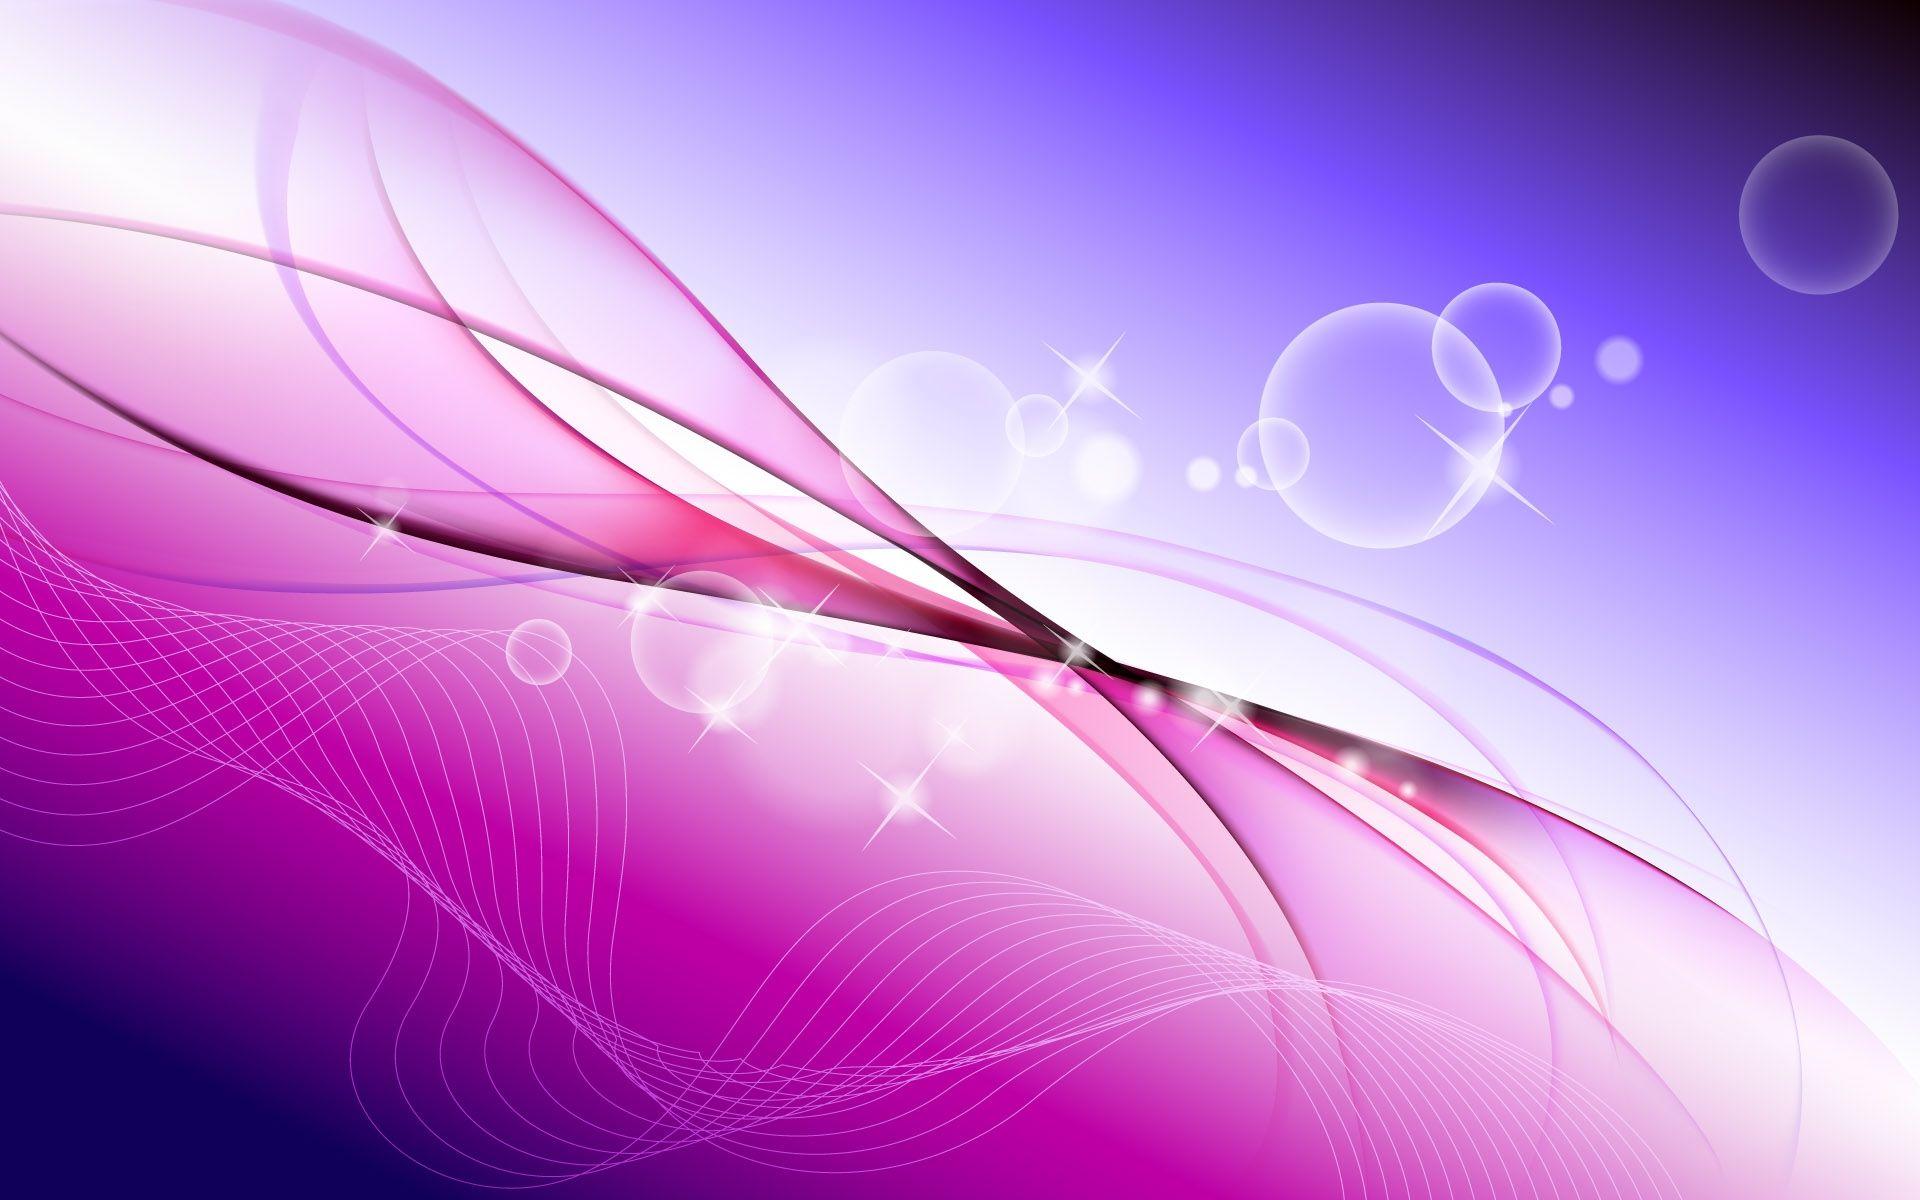 Abstract Light Purple Background Hd / Download, share or upload your